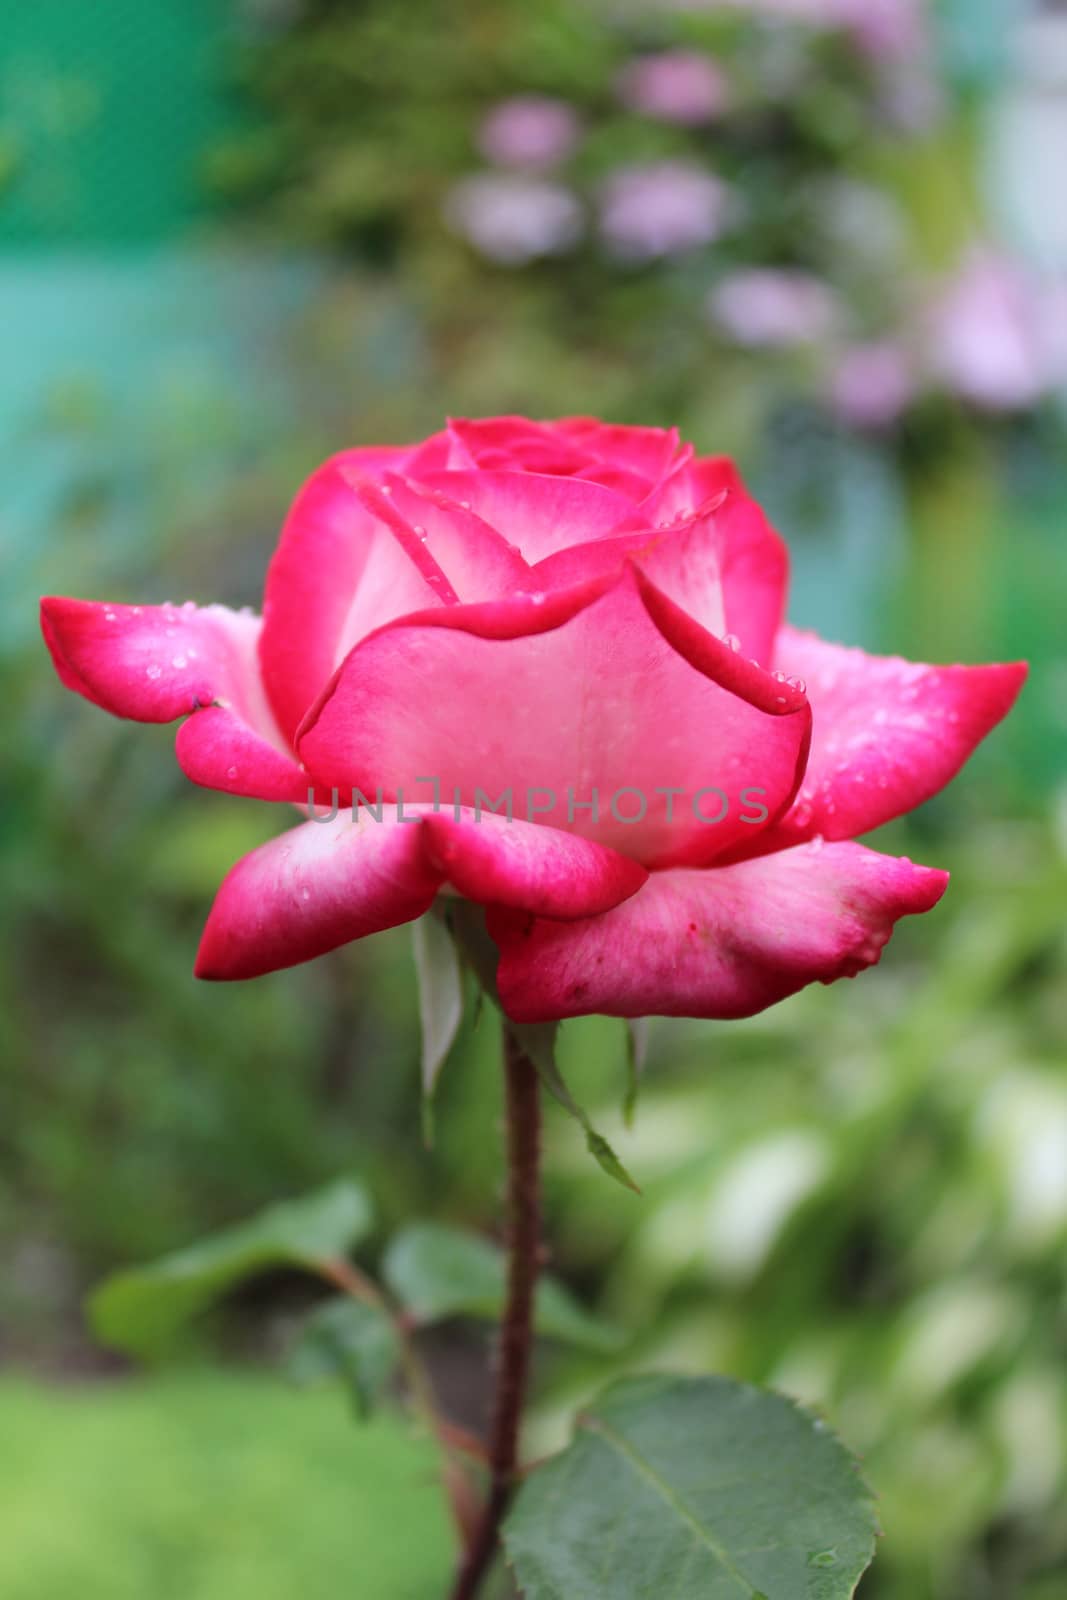 Close-up image of a pink rose with dew drops.